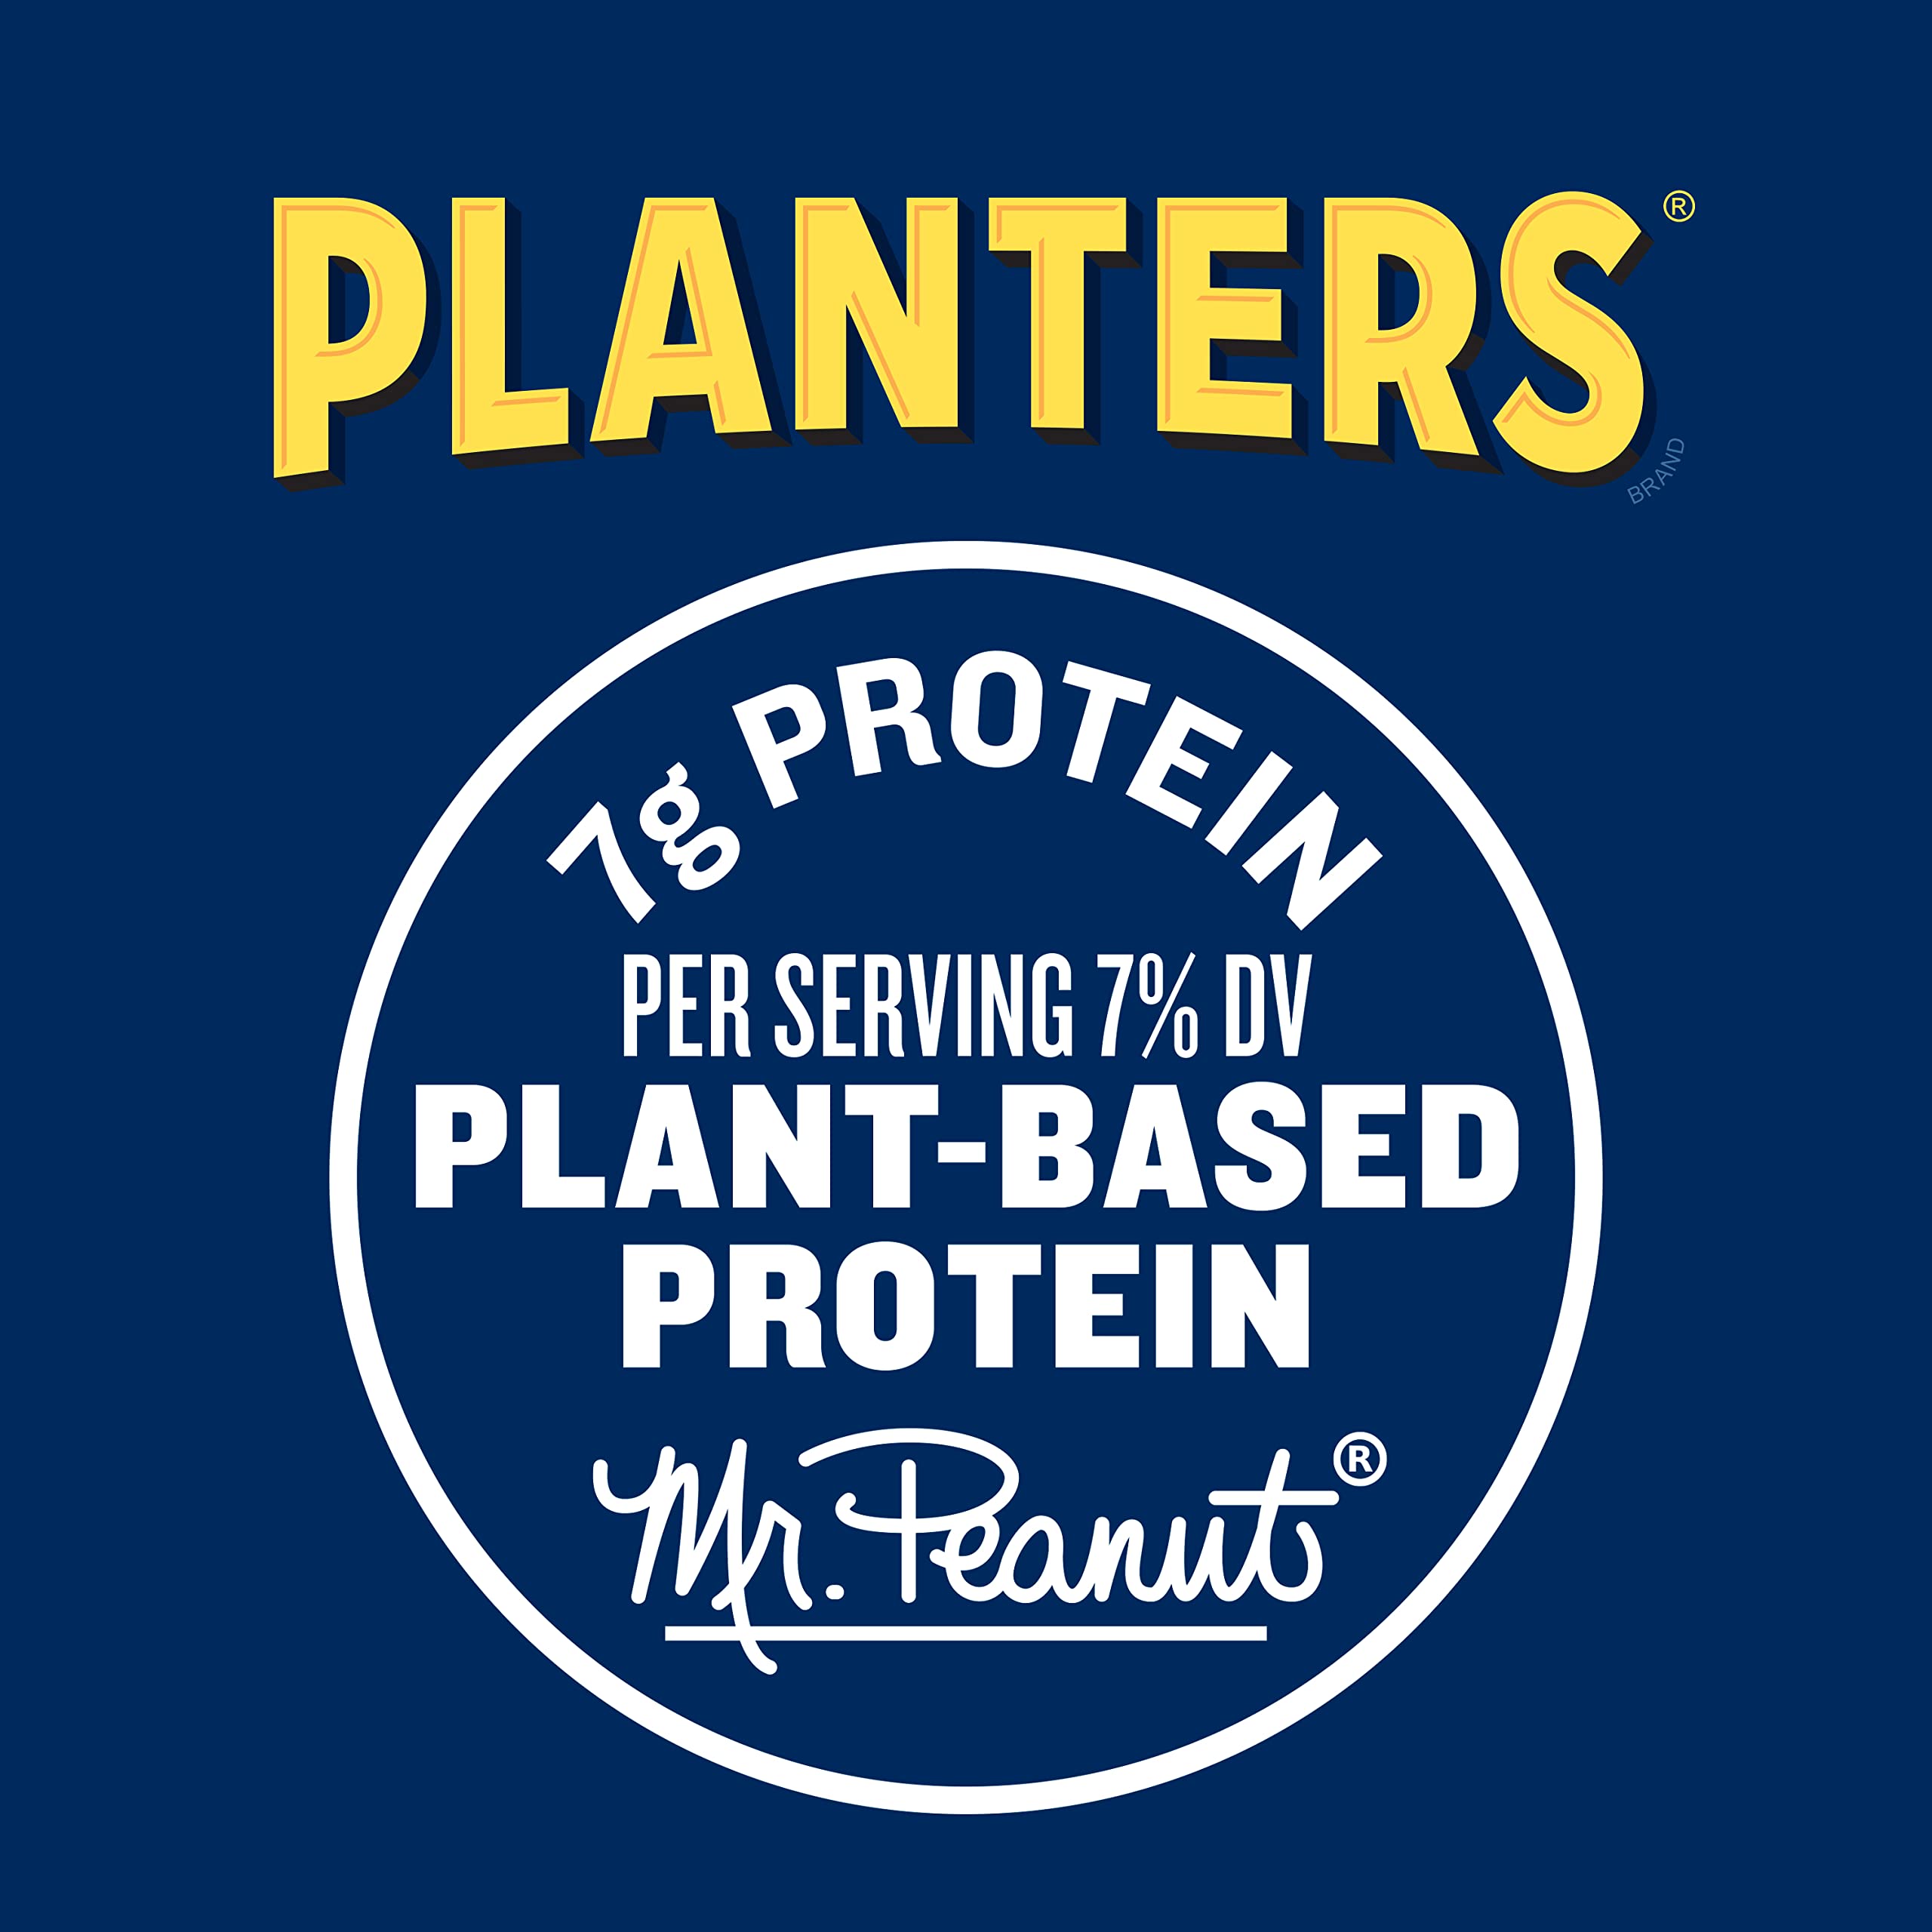 Planters Sweet and Spicy Dry Roasted Peanuts, 16 oz.